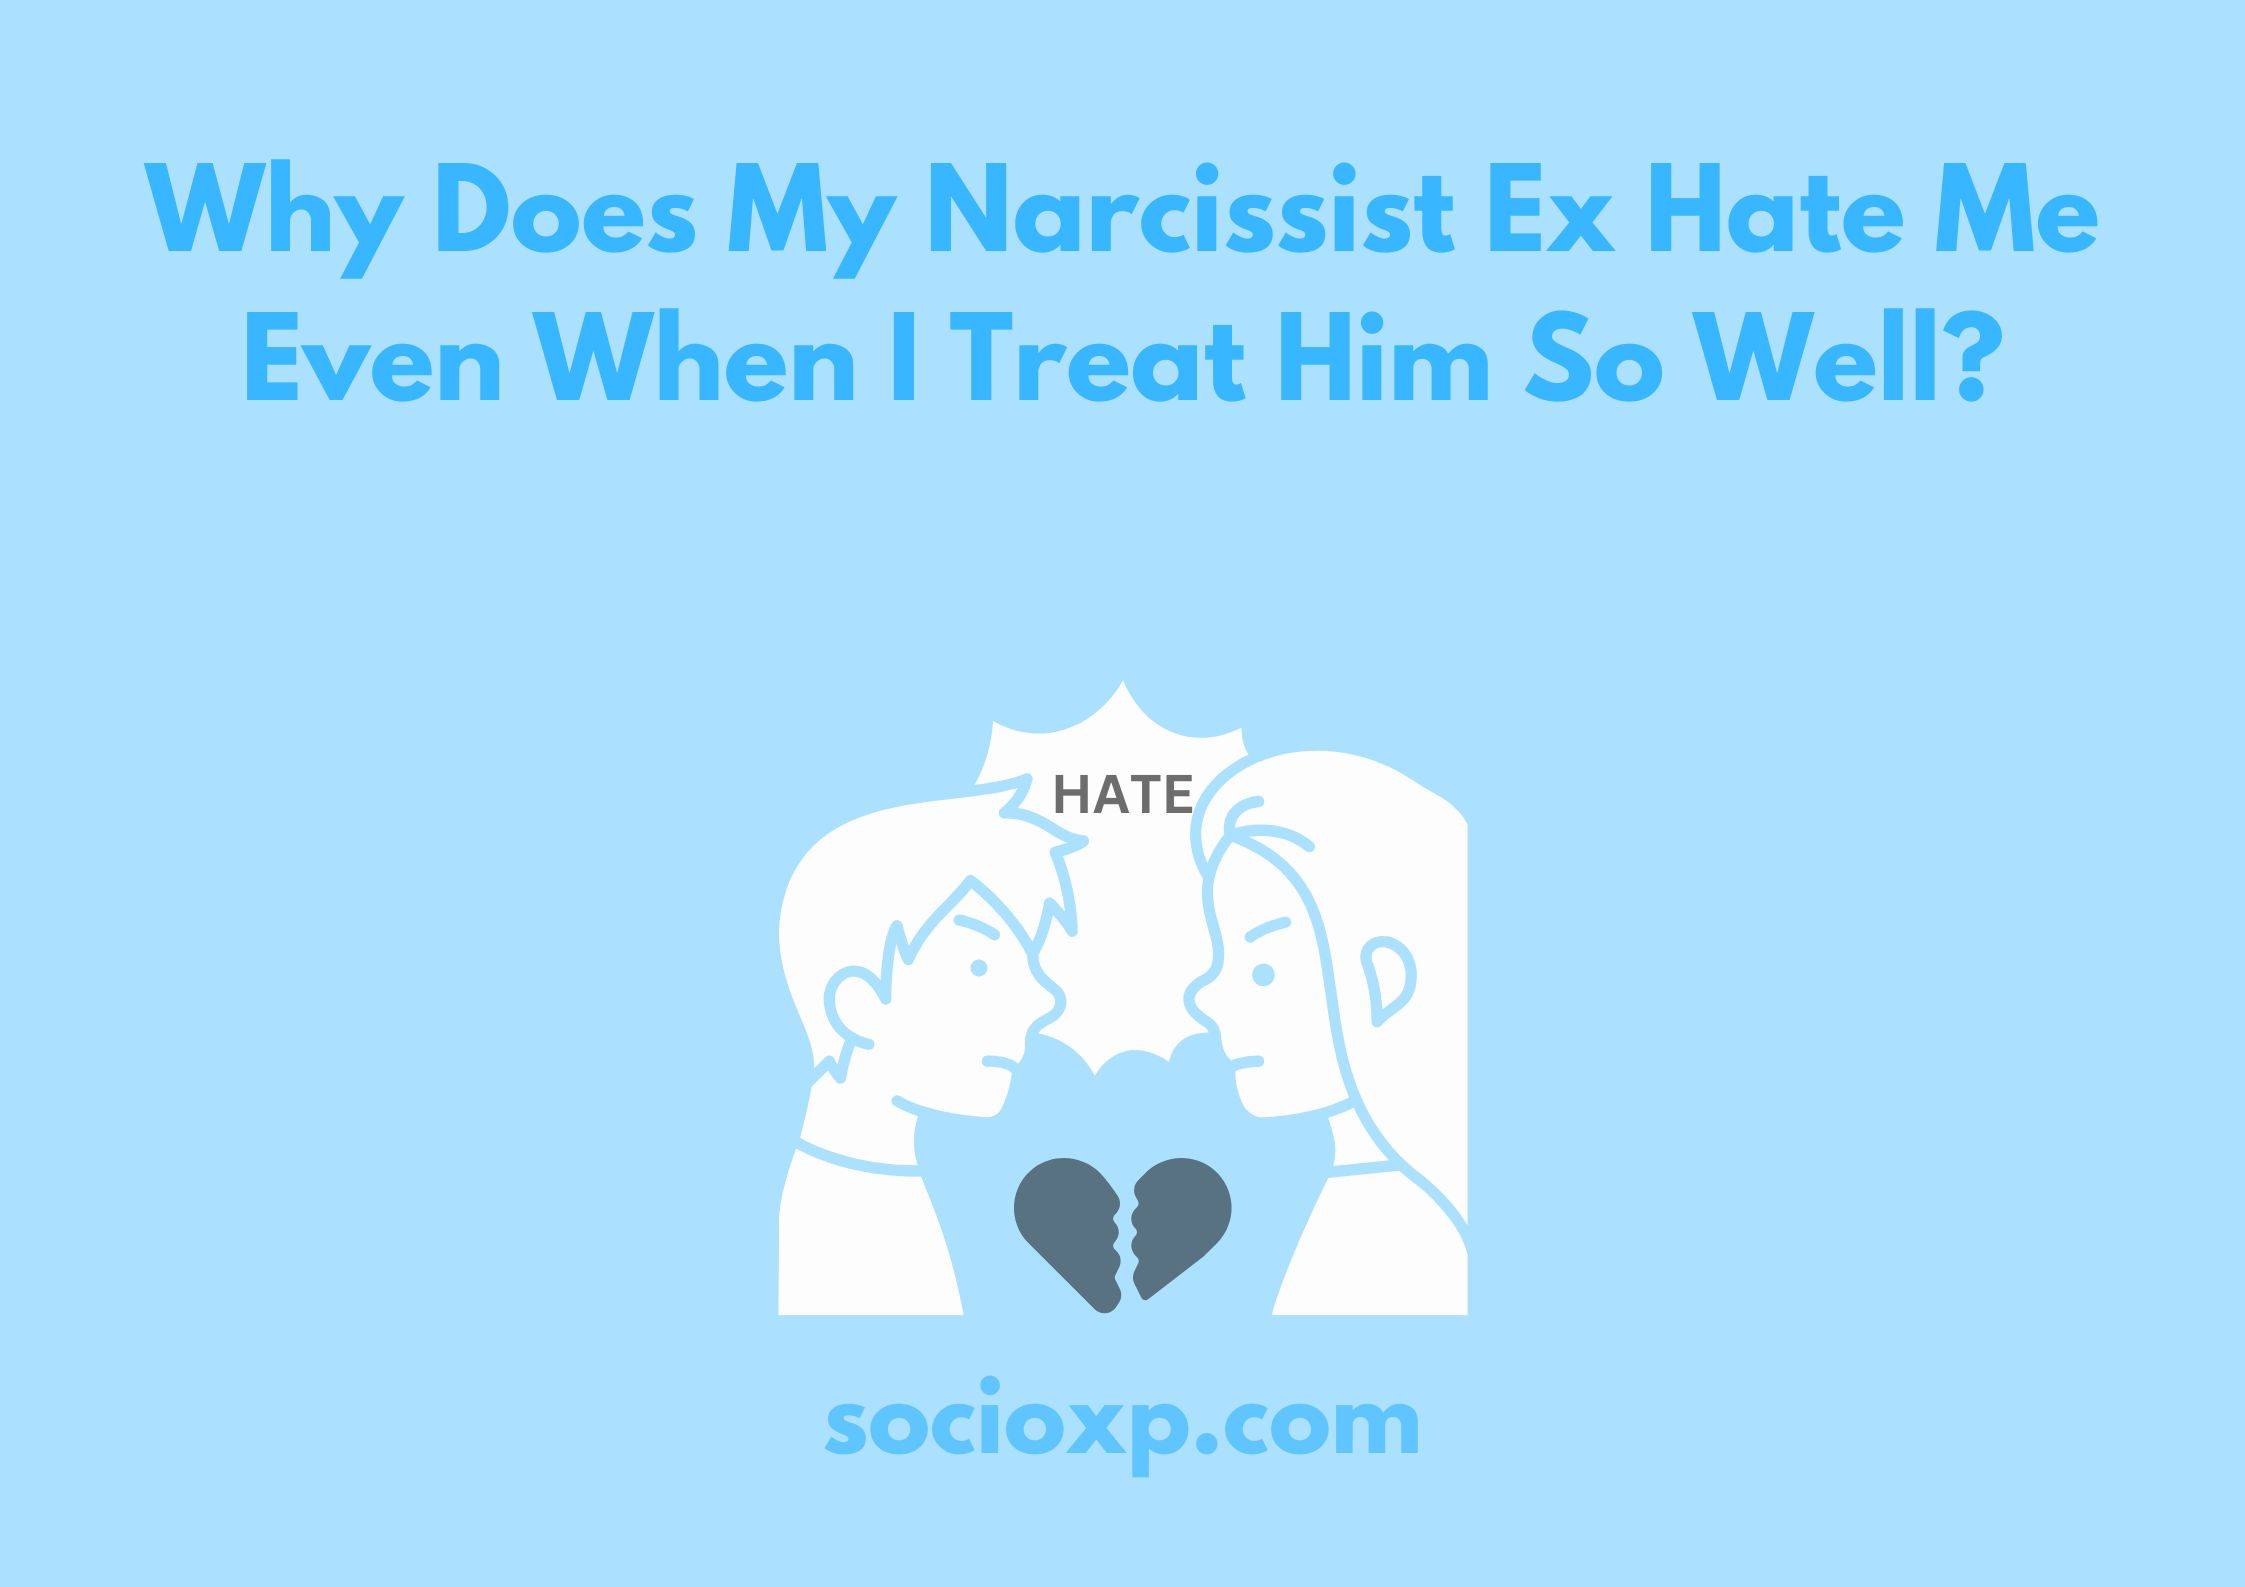 Why Does My Narcissist Ex Hate Me Even When I Treat Him So Well?